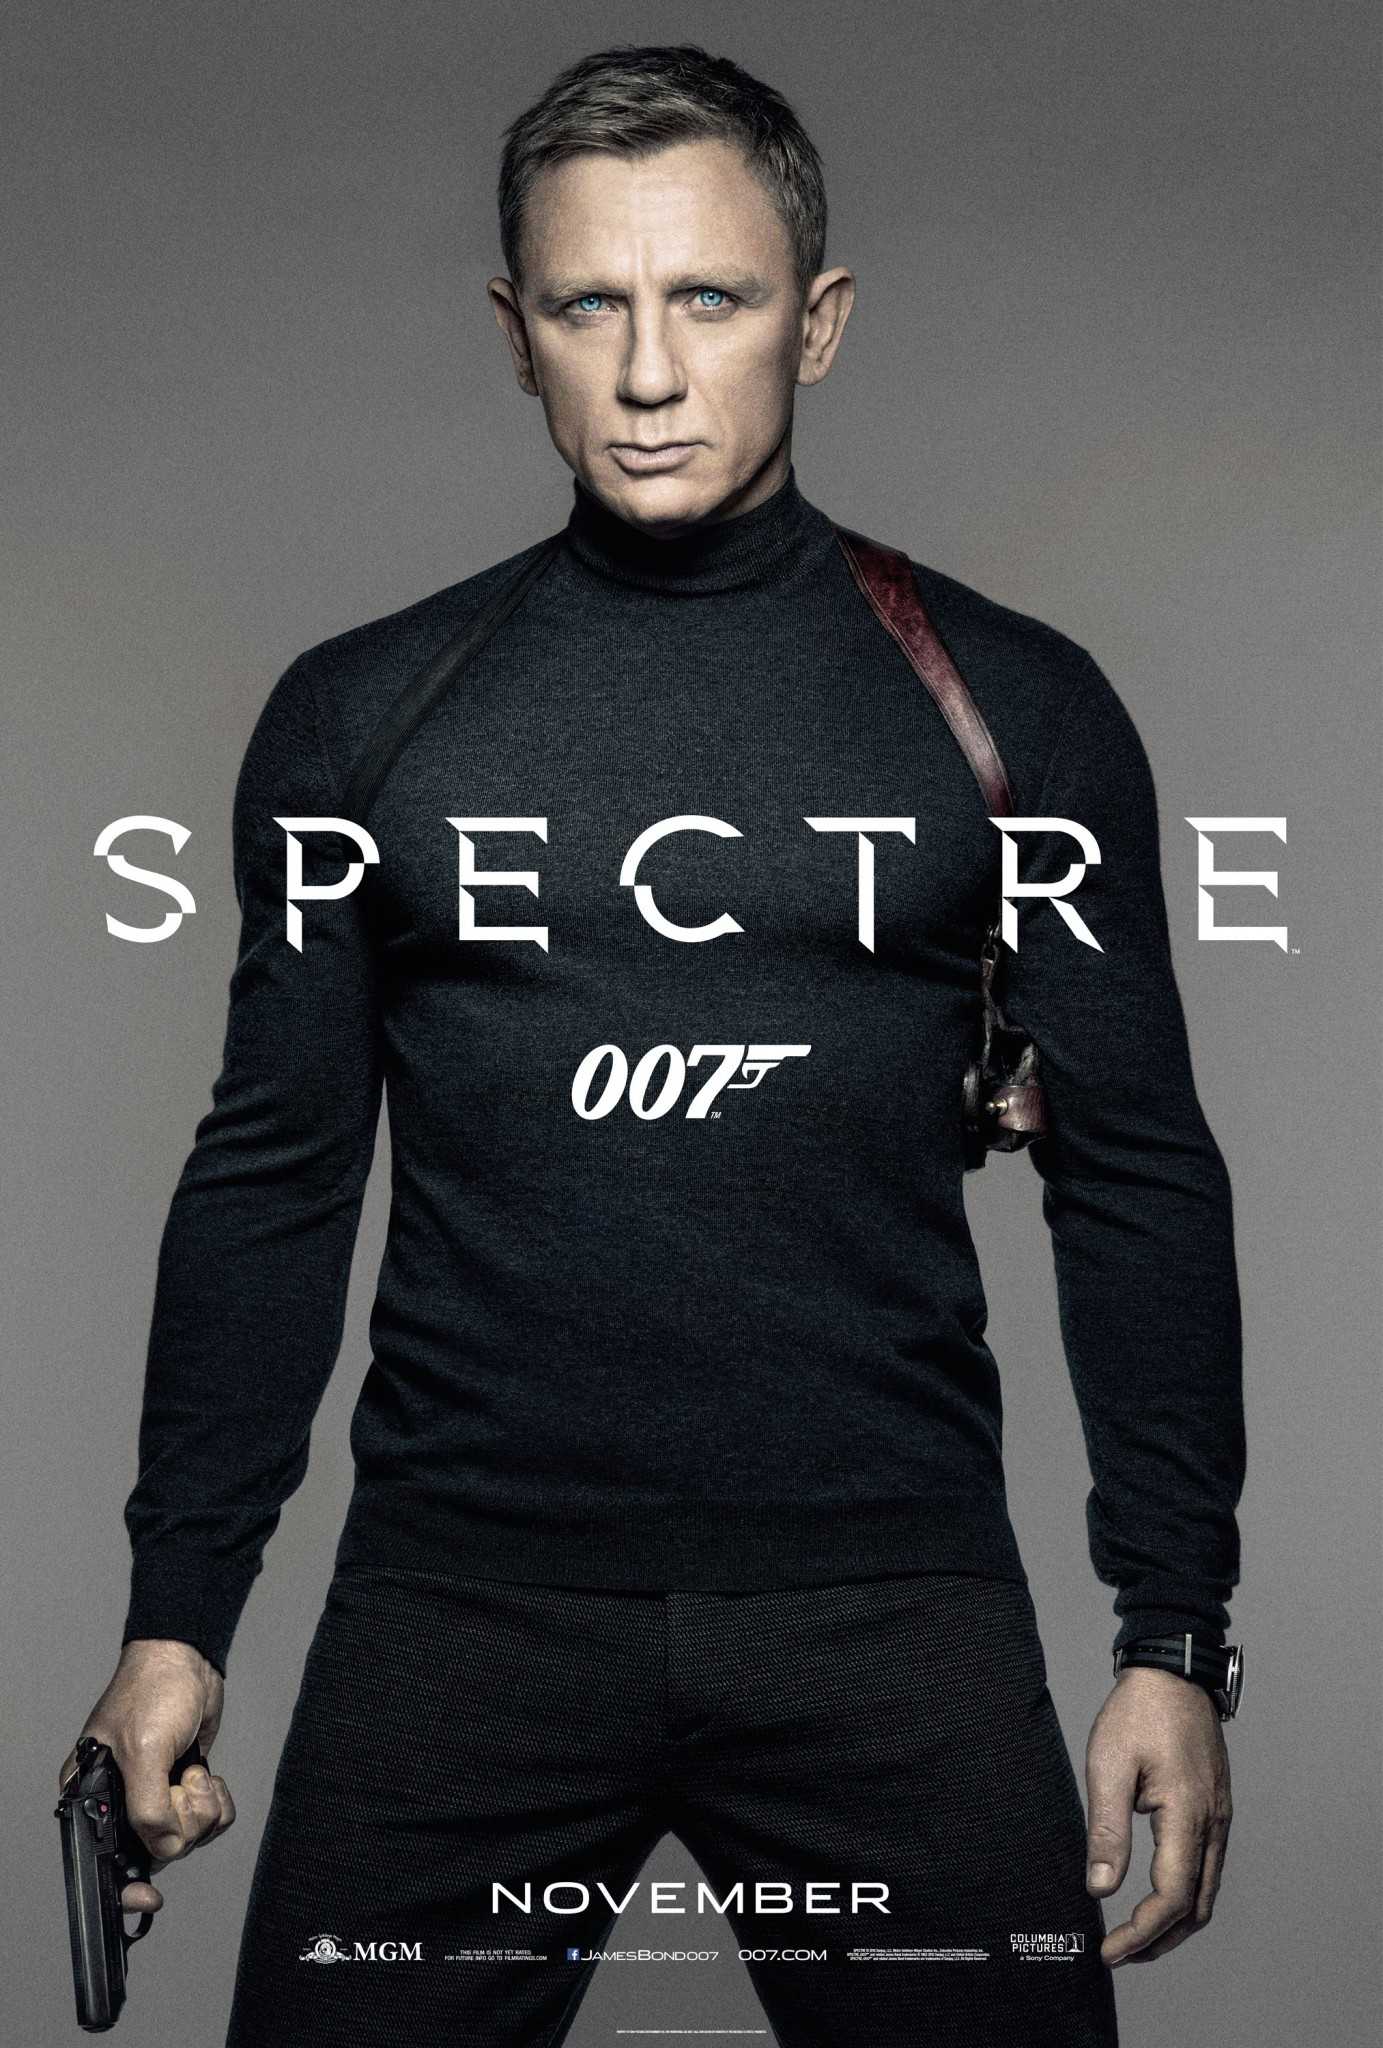 The dead are alive: a review of Spectre